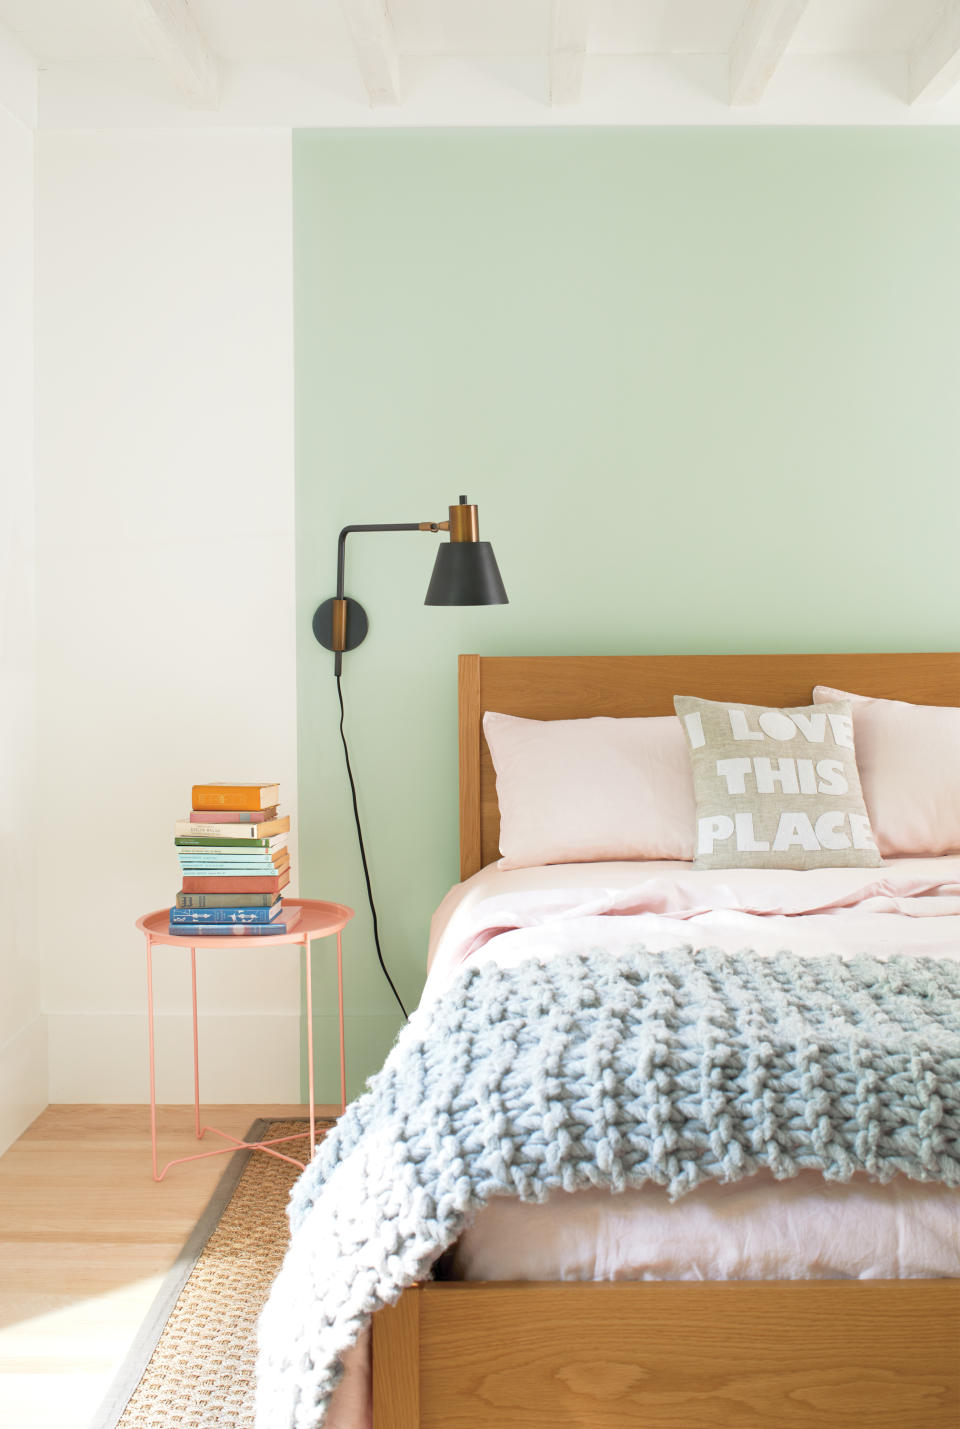 2. Frame your headboard with a calming mint green